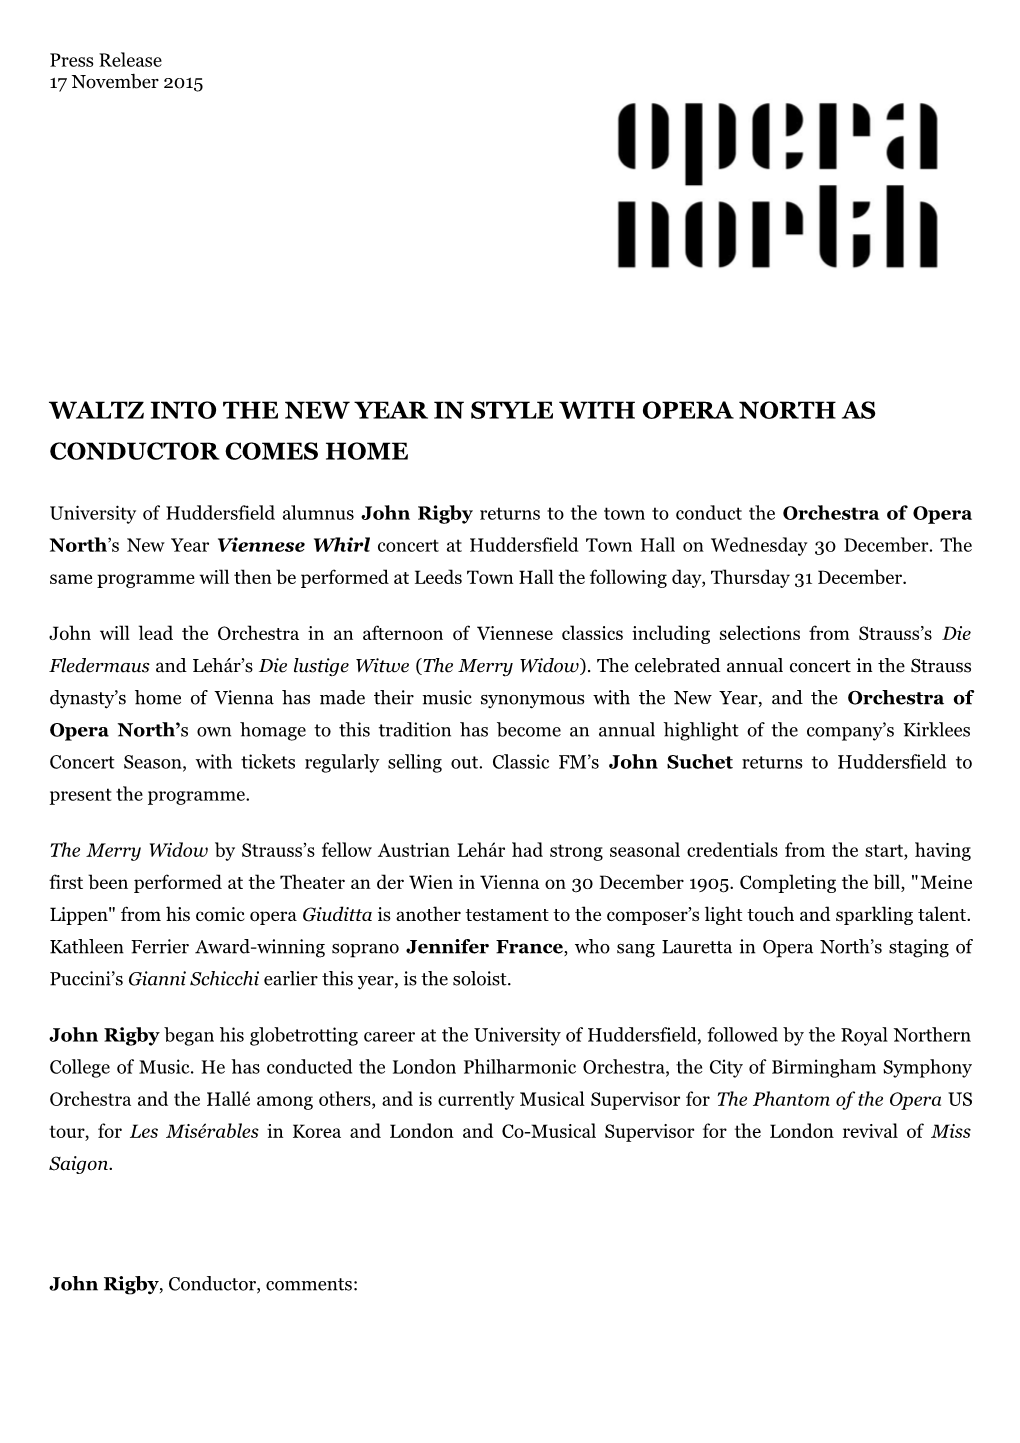 Waltz Into the New Year in Style with Opera North As Conductor Comes Home